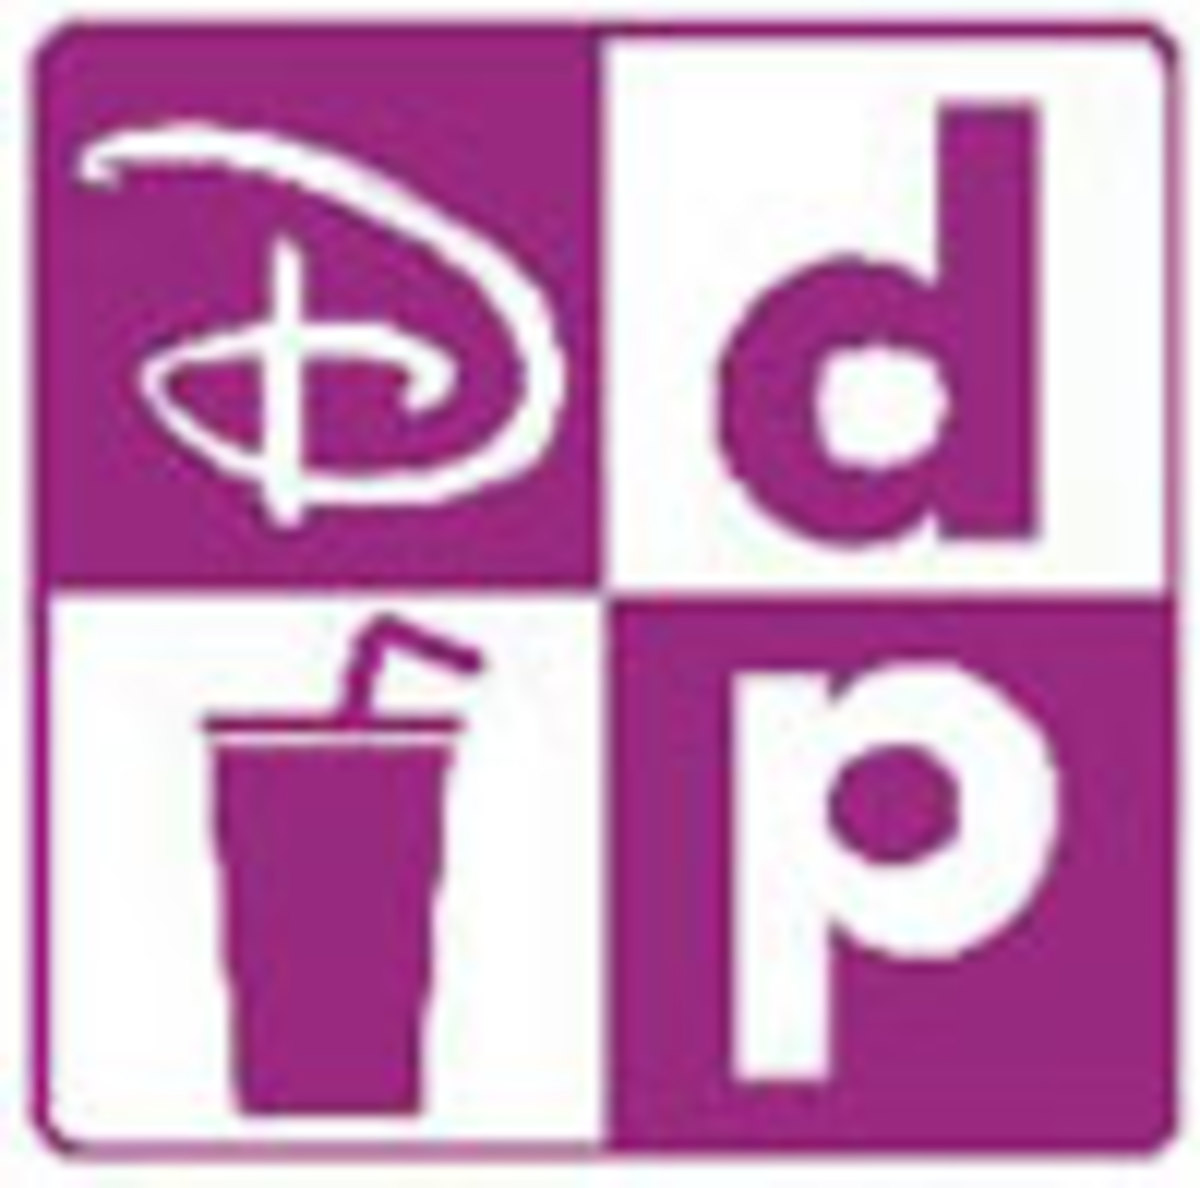 Look for this logo in the food courts to use your DDP